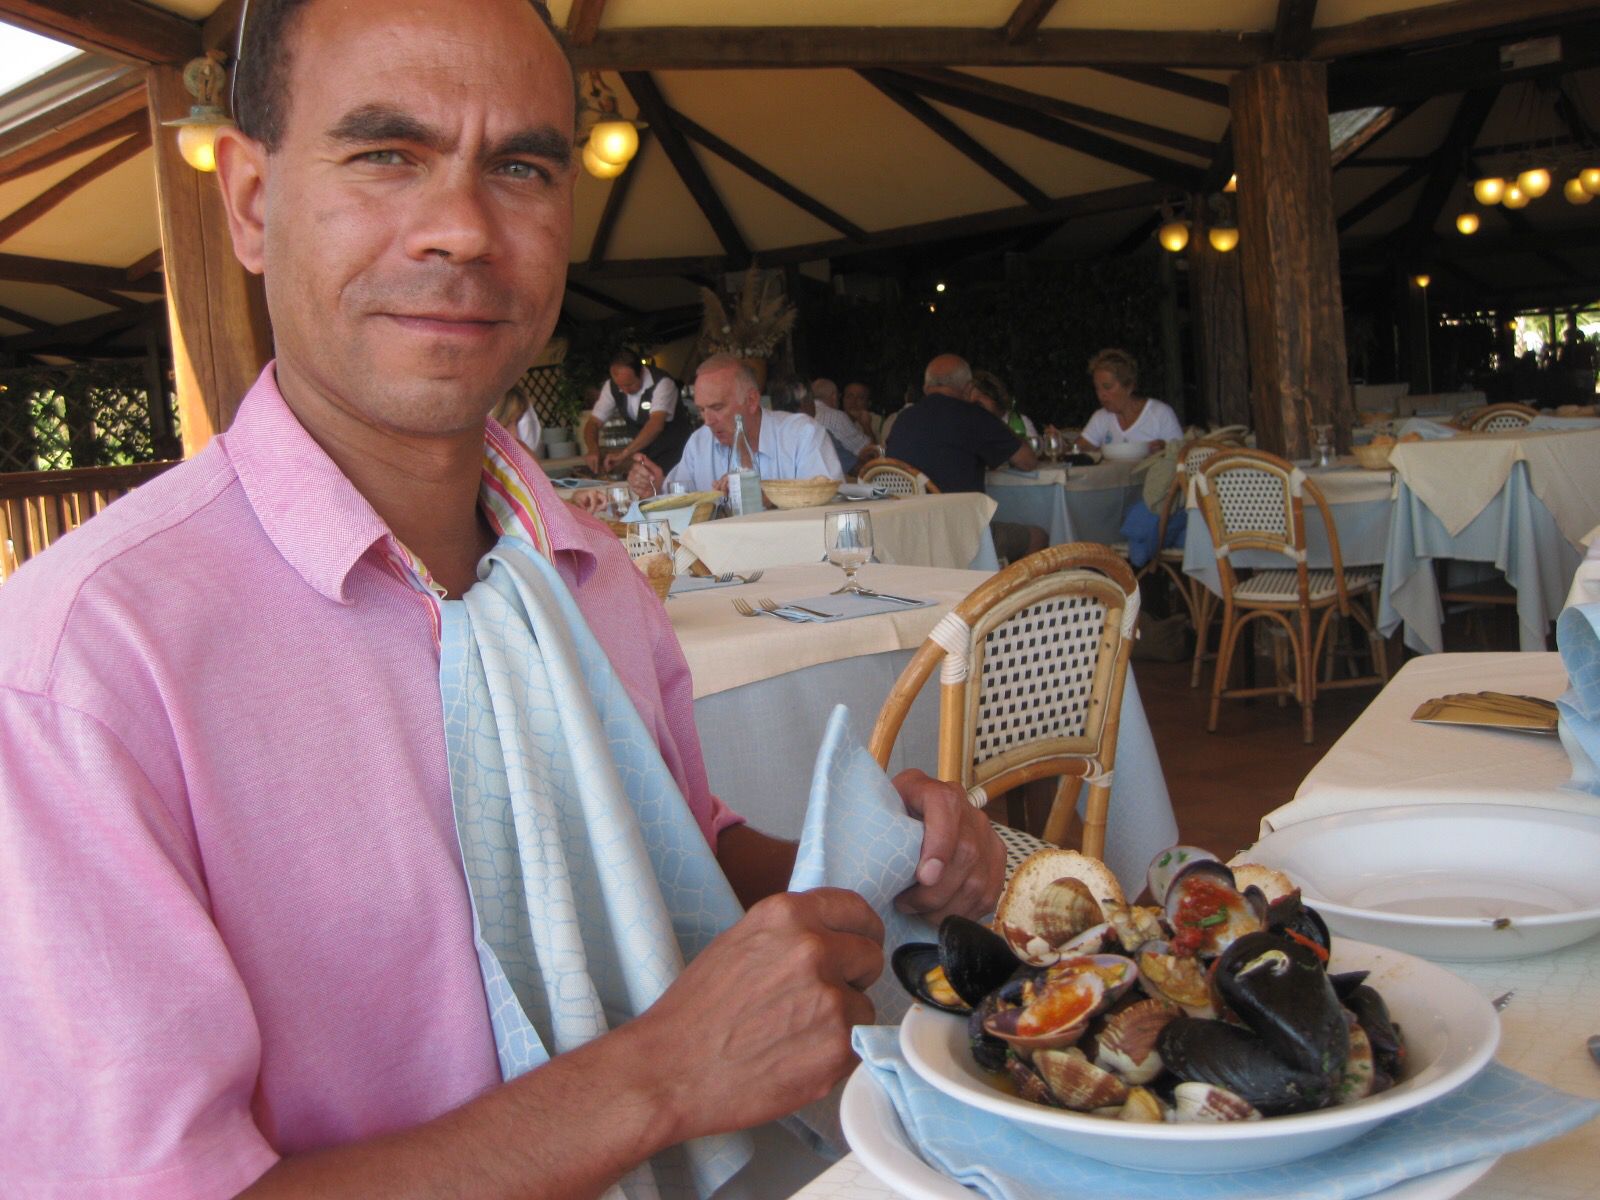 Marks, an expert in Sicilian cuisine is pictured seated at a local restaurant, wearing a pink shirt and a napkin enjoying a bowl fo seafood